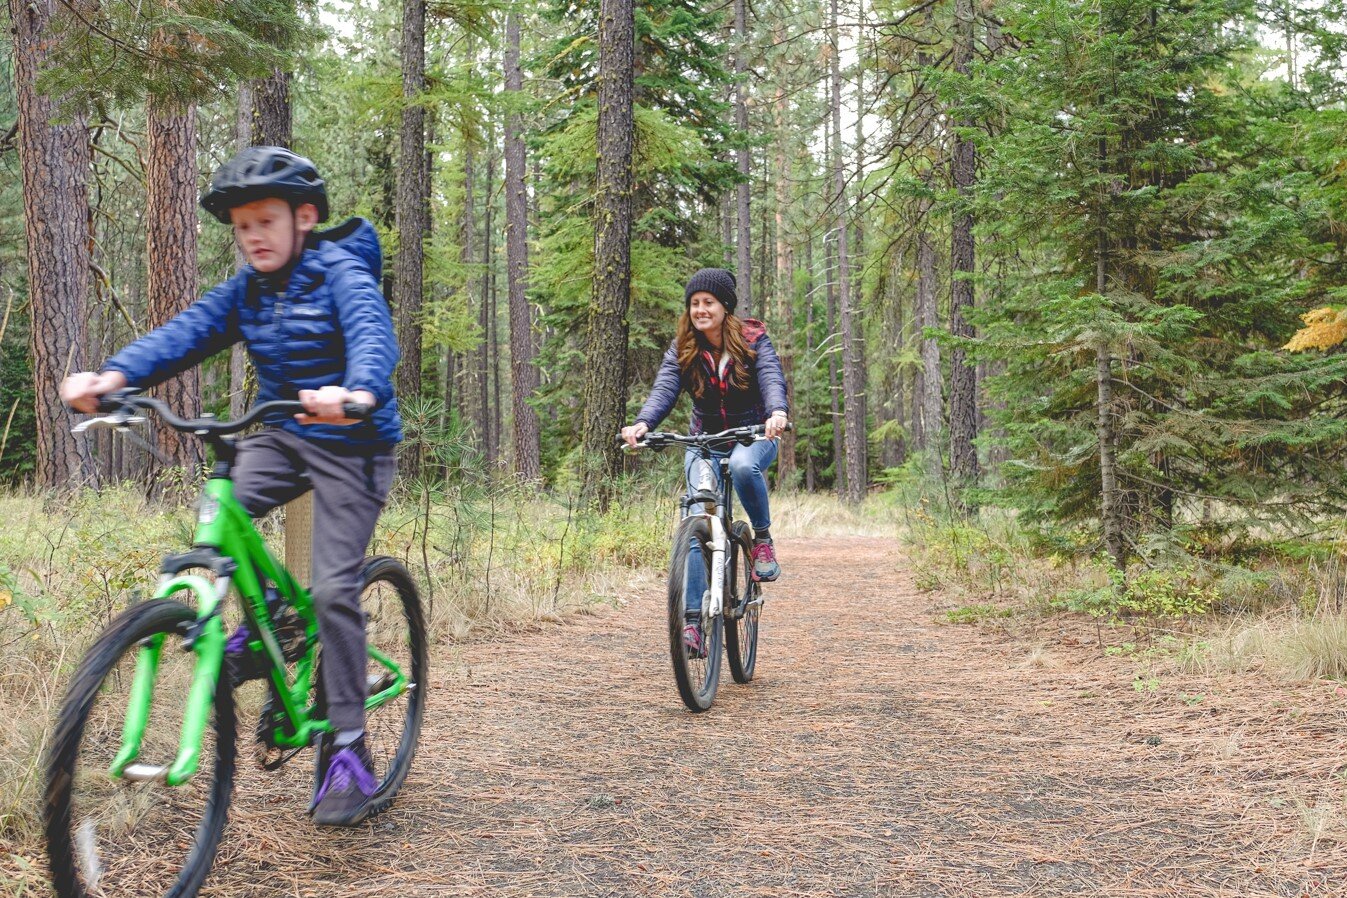 Mom and son hit the best mountain biking trails just outside of Cold Springs Resort in Camp Sherman Oregon